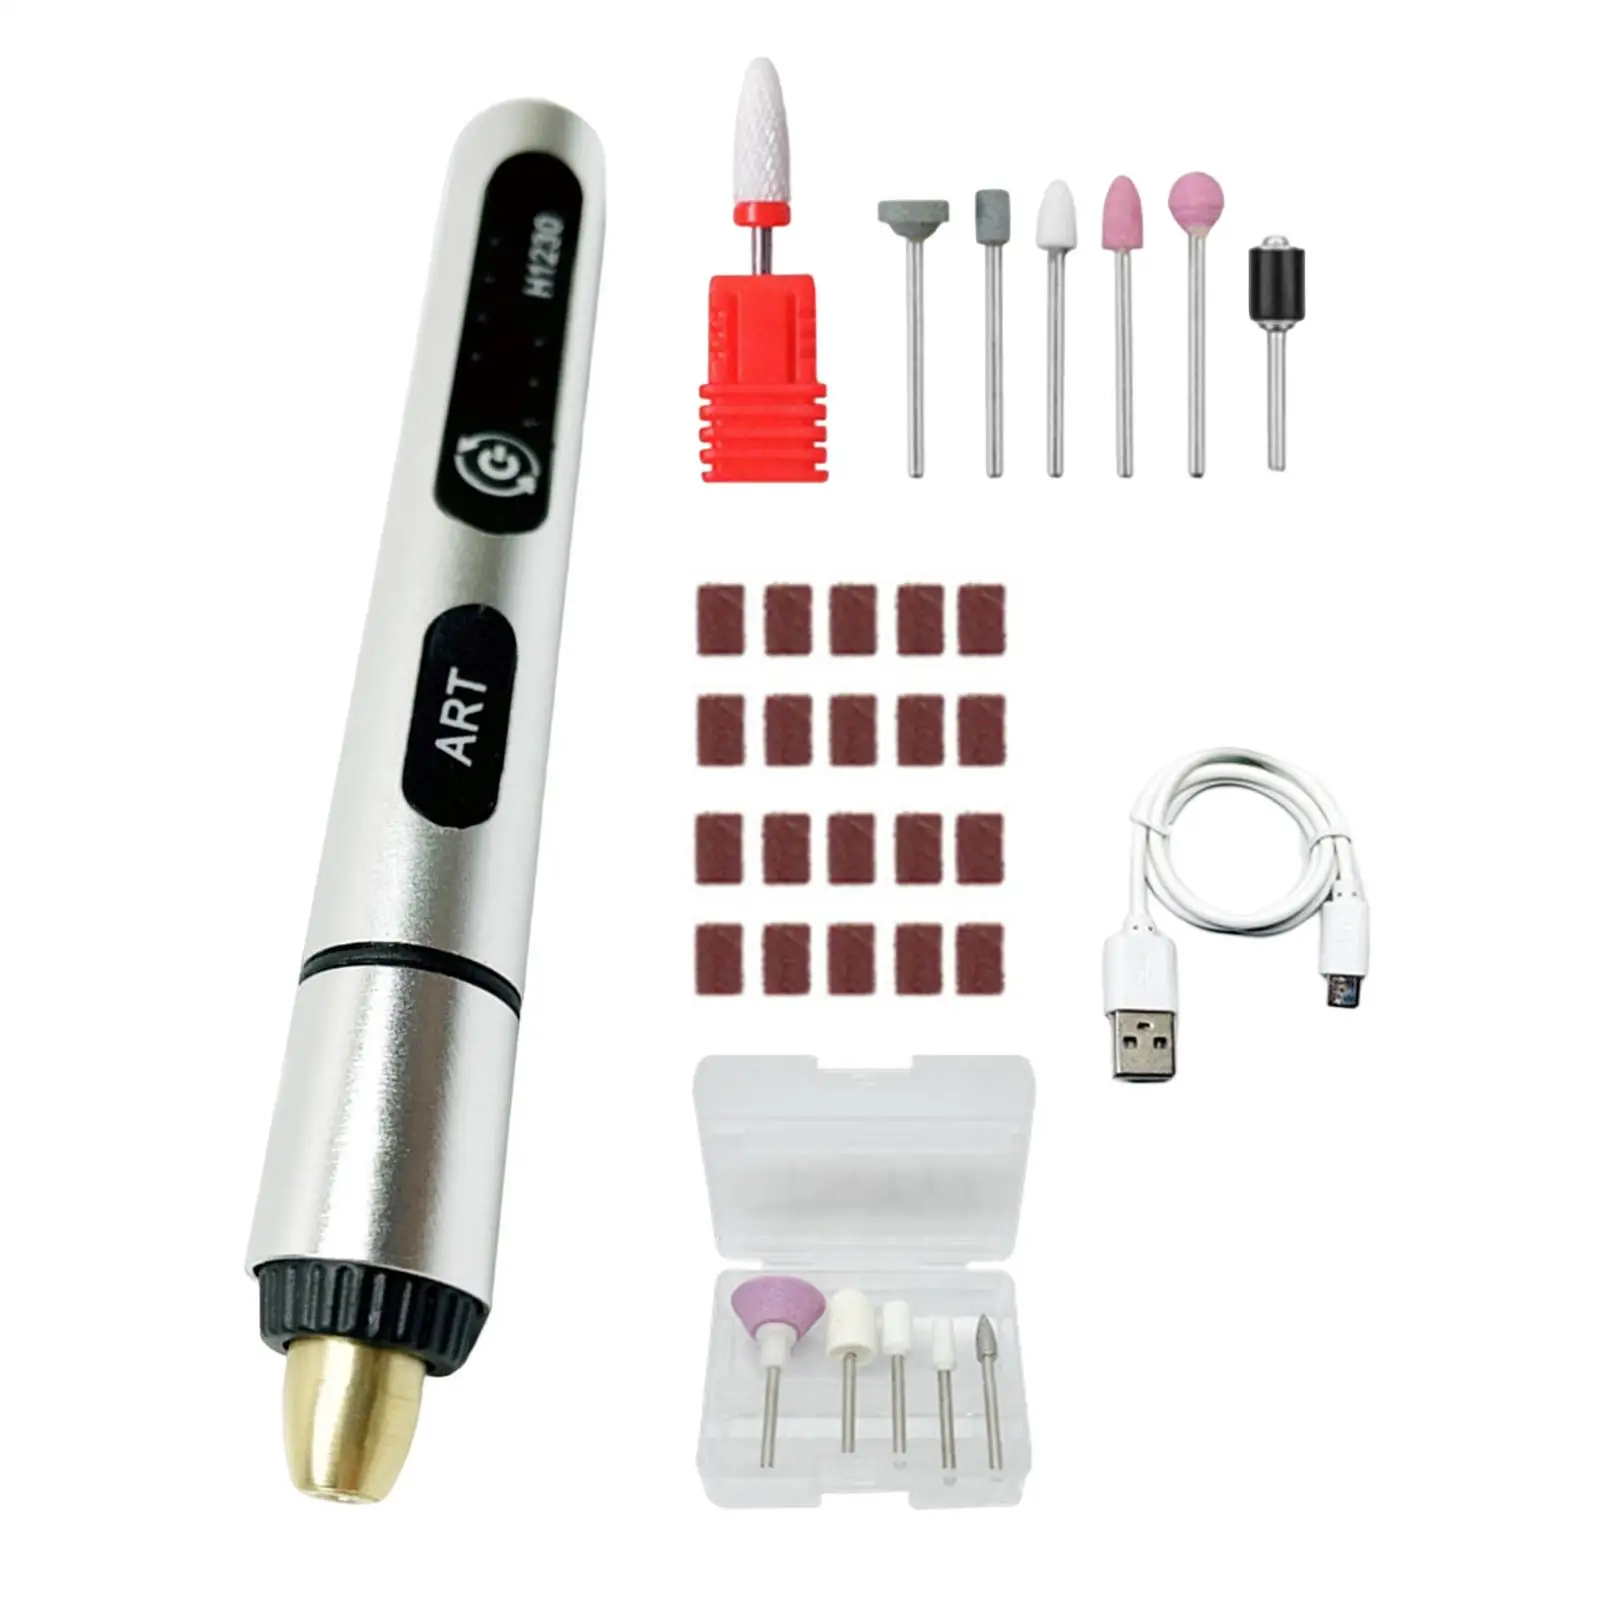 Electric Nail Drill Machine, USB Charging Manicure Pedicure Pen Sander Polisher for Wood